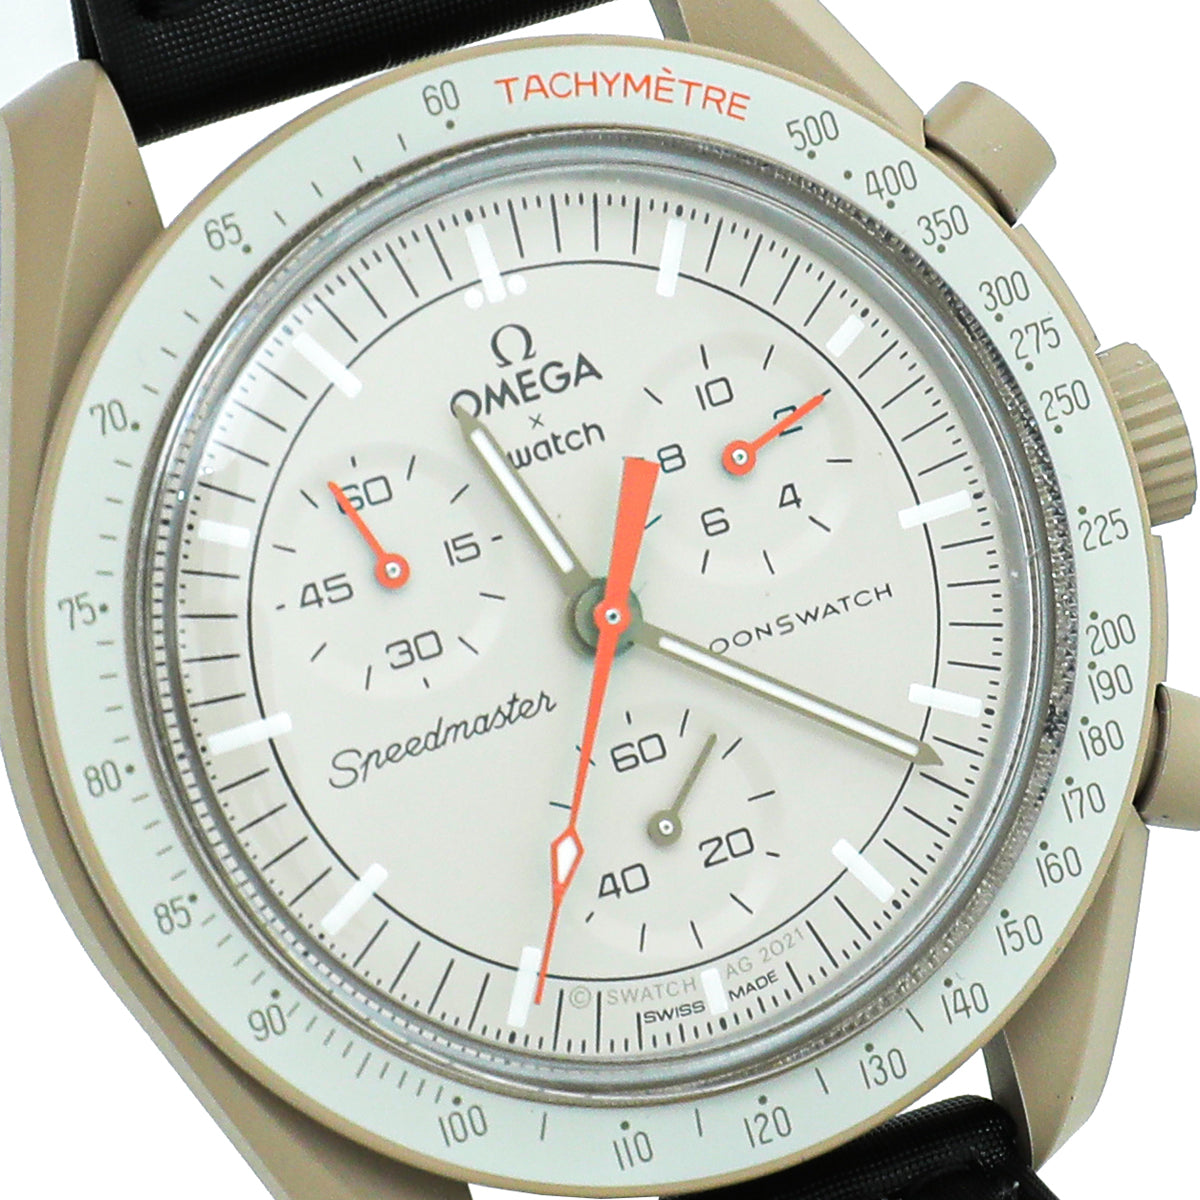 Omega Tricolor Swatch Speedmaster Moonswatch Mission to Jupiter 40mm Watch